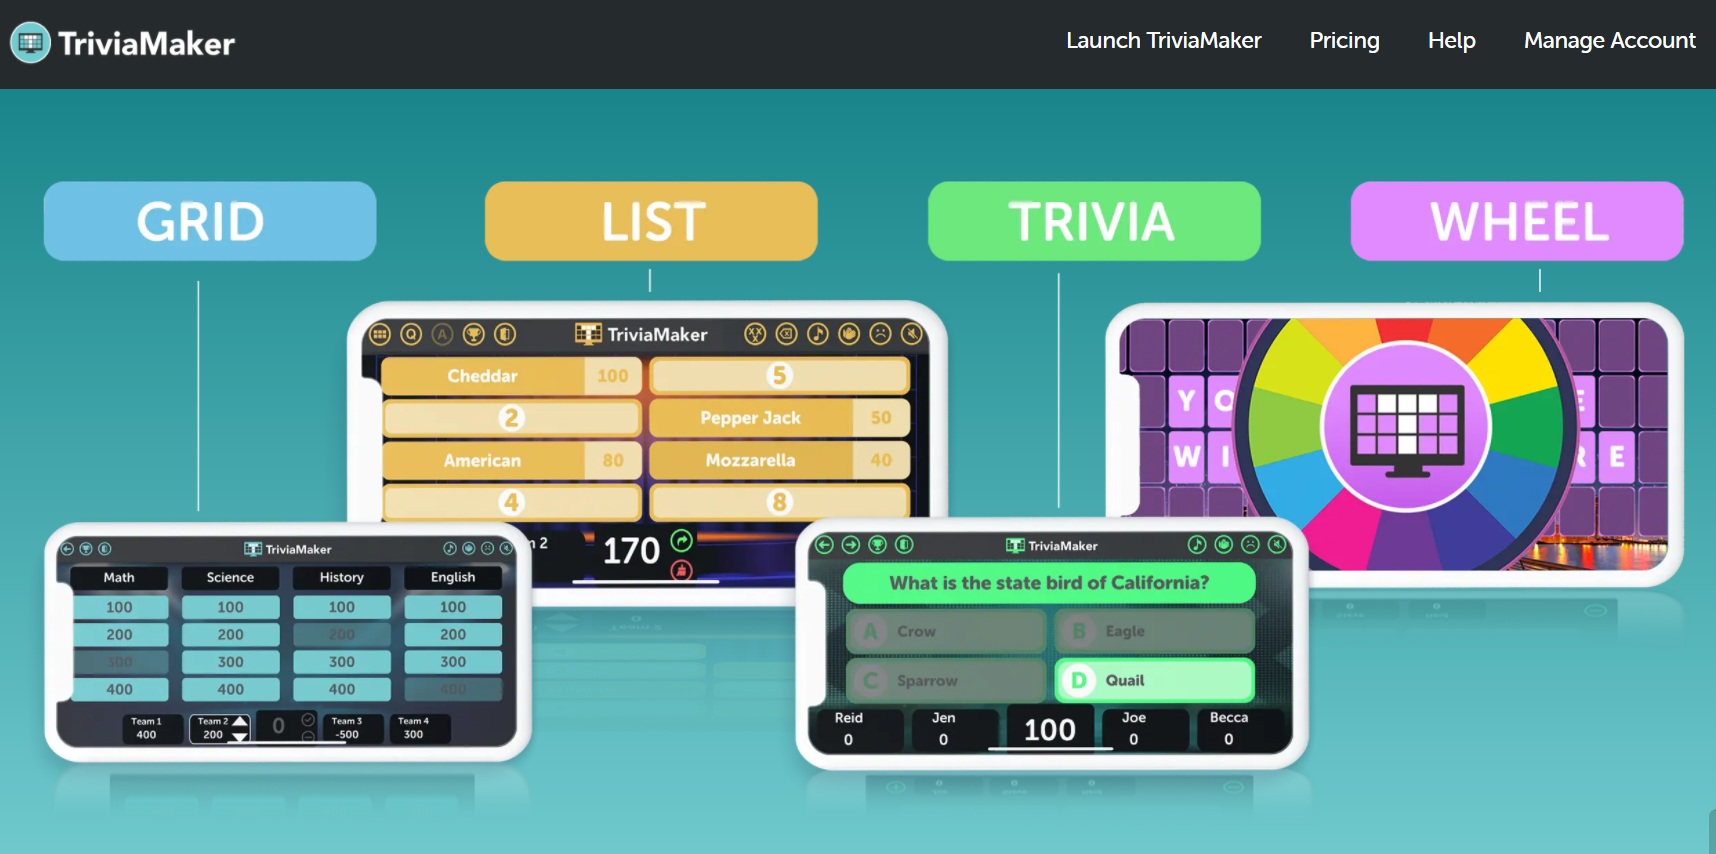 trivia maker dashboard image showing the four different interfaces